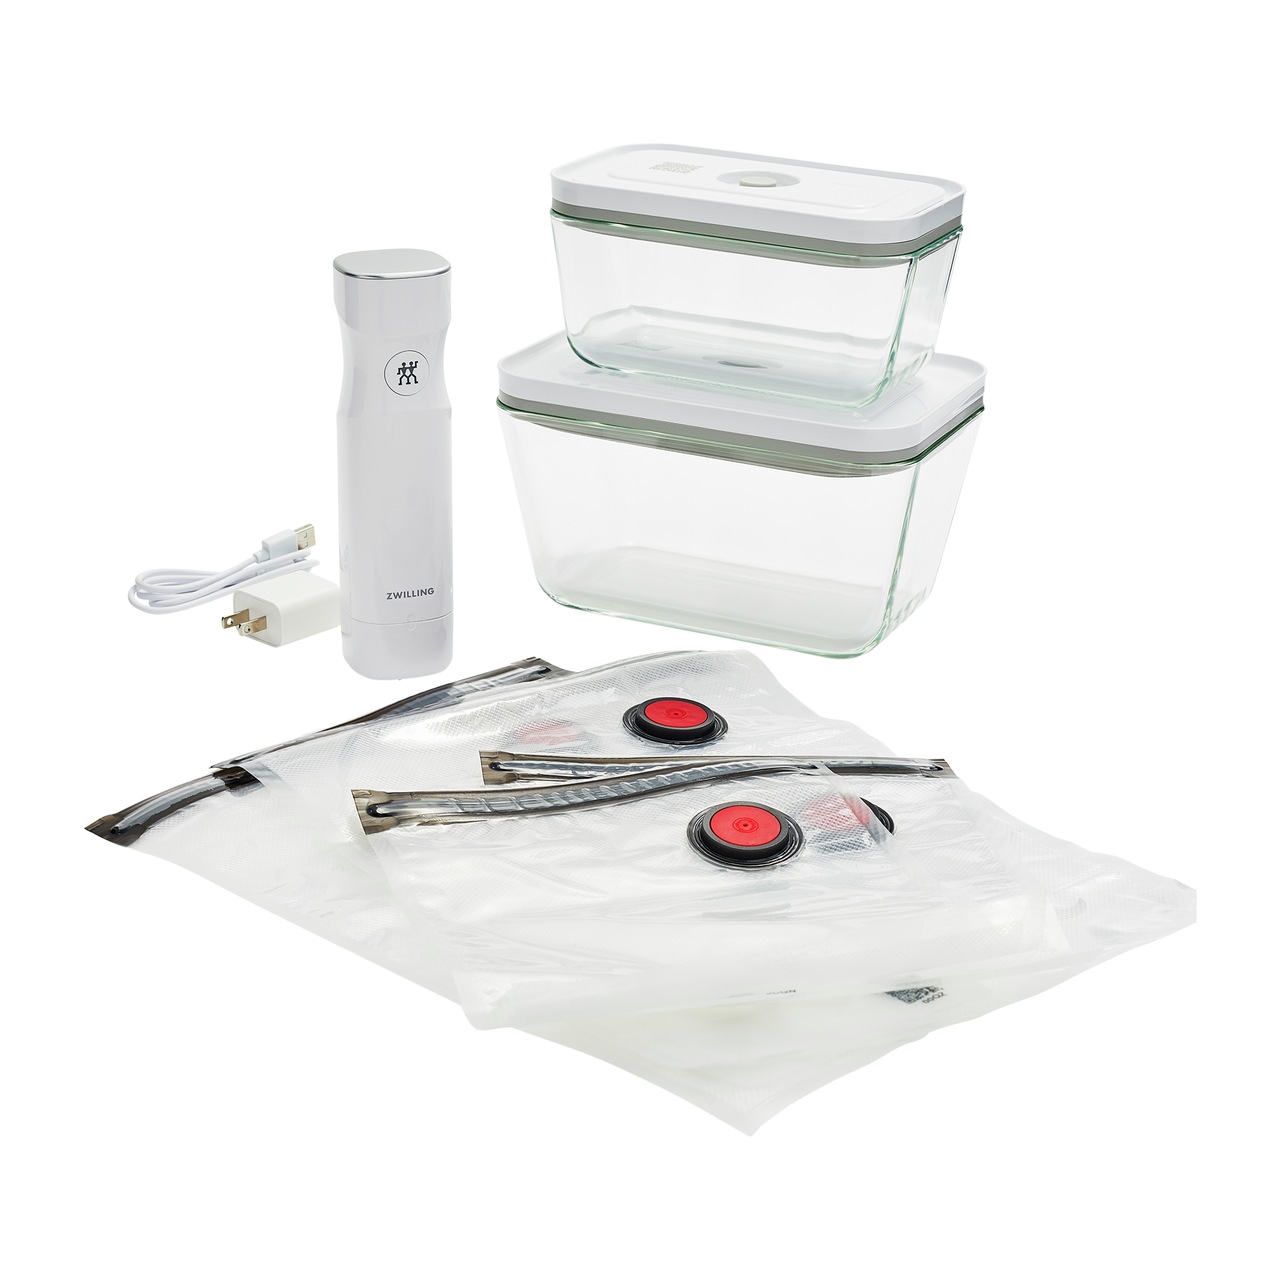 https://royaldesign.com/image/2/zwilling-fresh-save-starter-kit-with-vacuum-pump-bags-containers-in-glass-7-pieces-4?w=800&quality=80